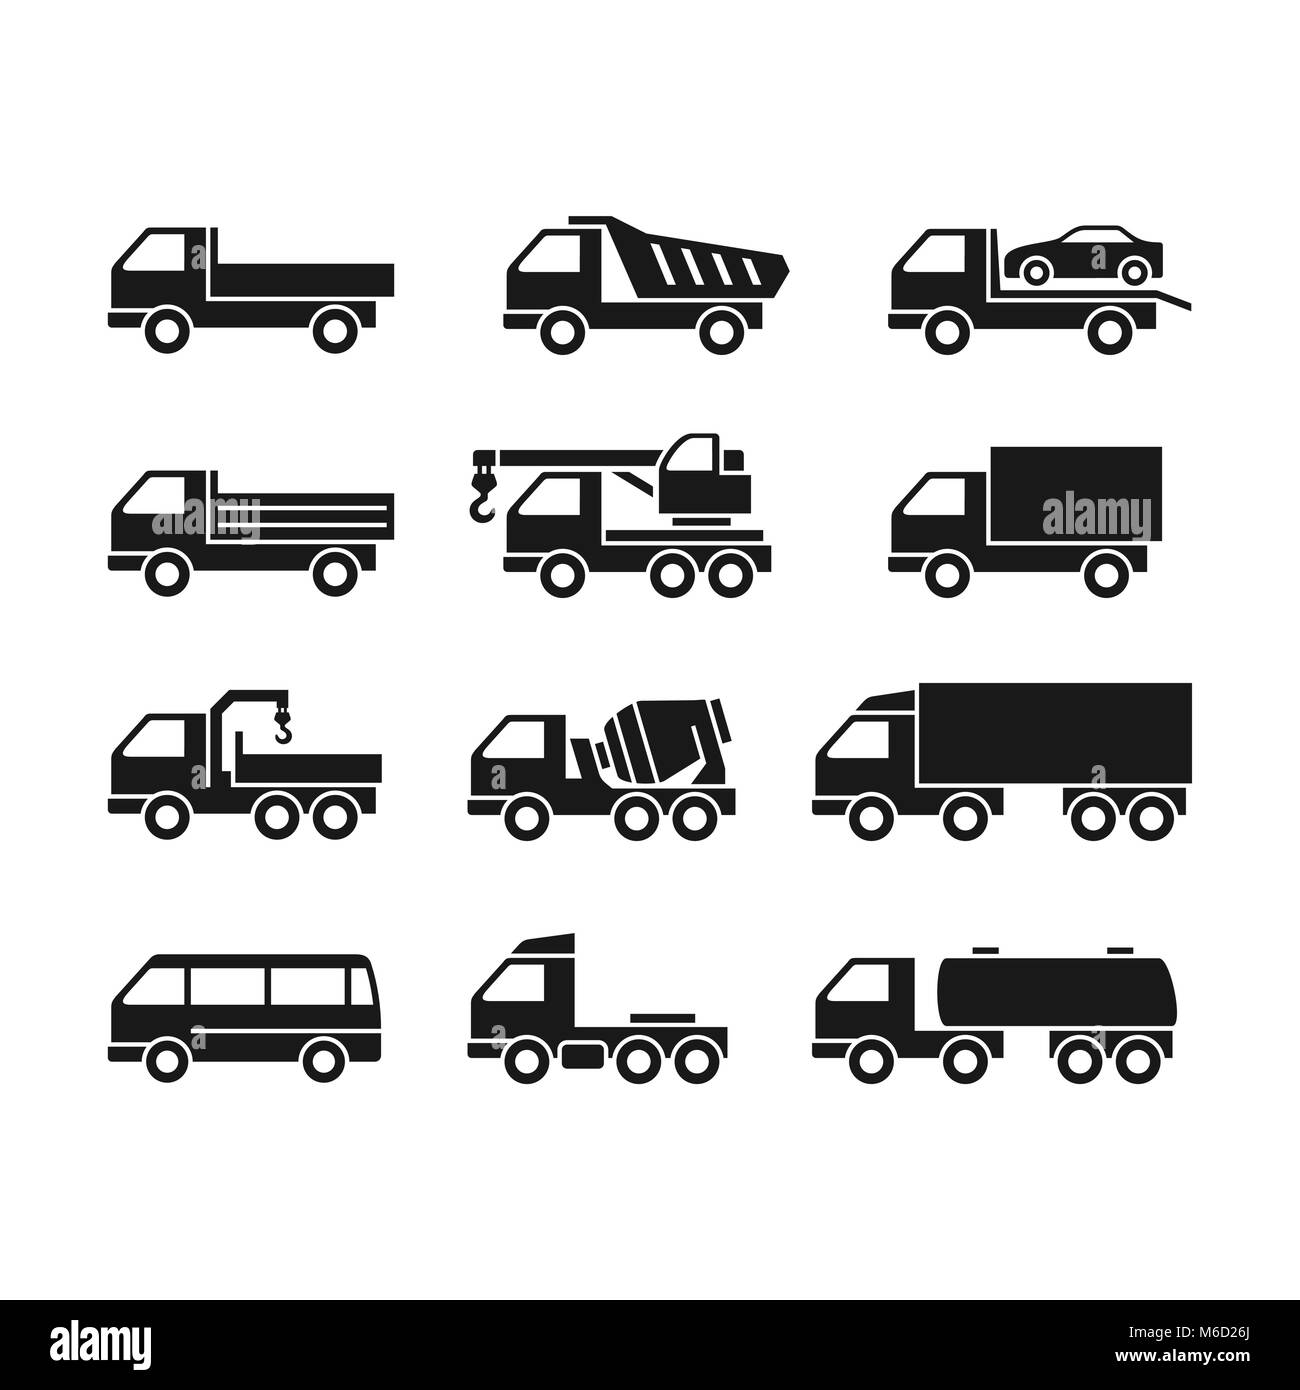 Set of Icons of Trucks on a White Background. Trucks of Different Function. Stock Vector